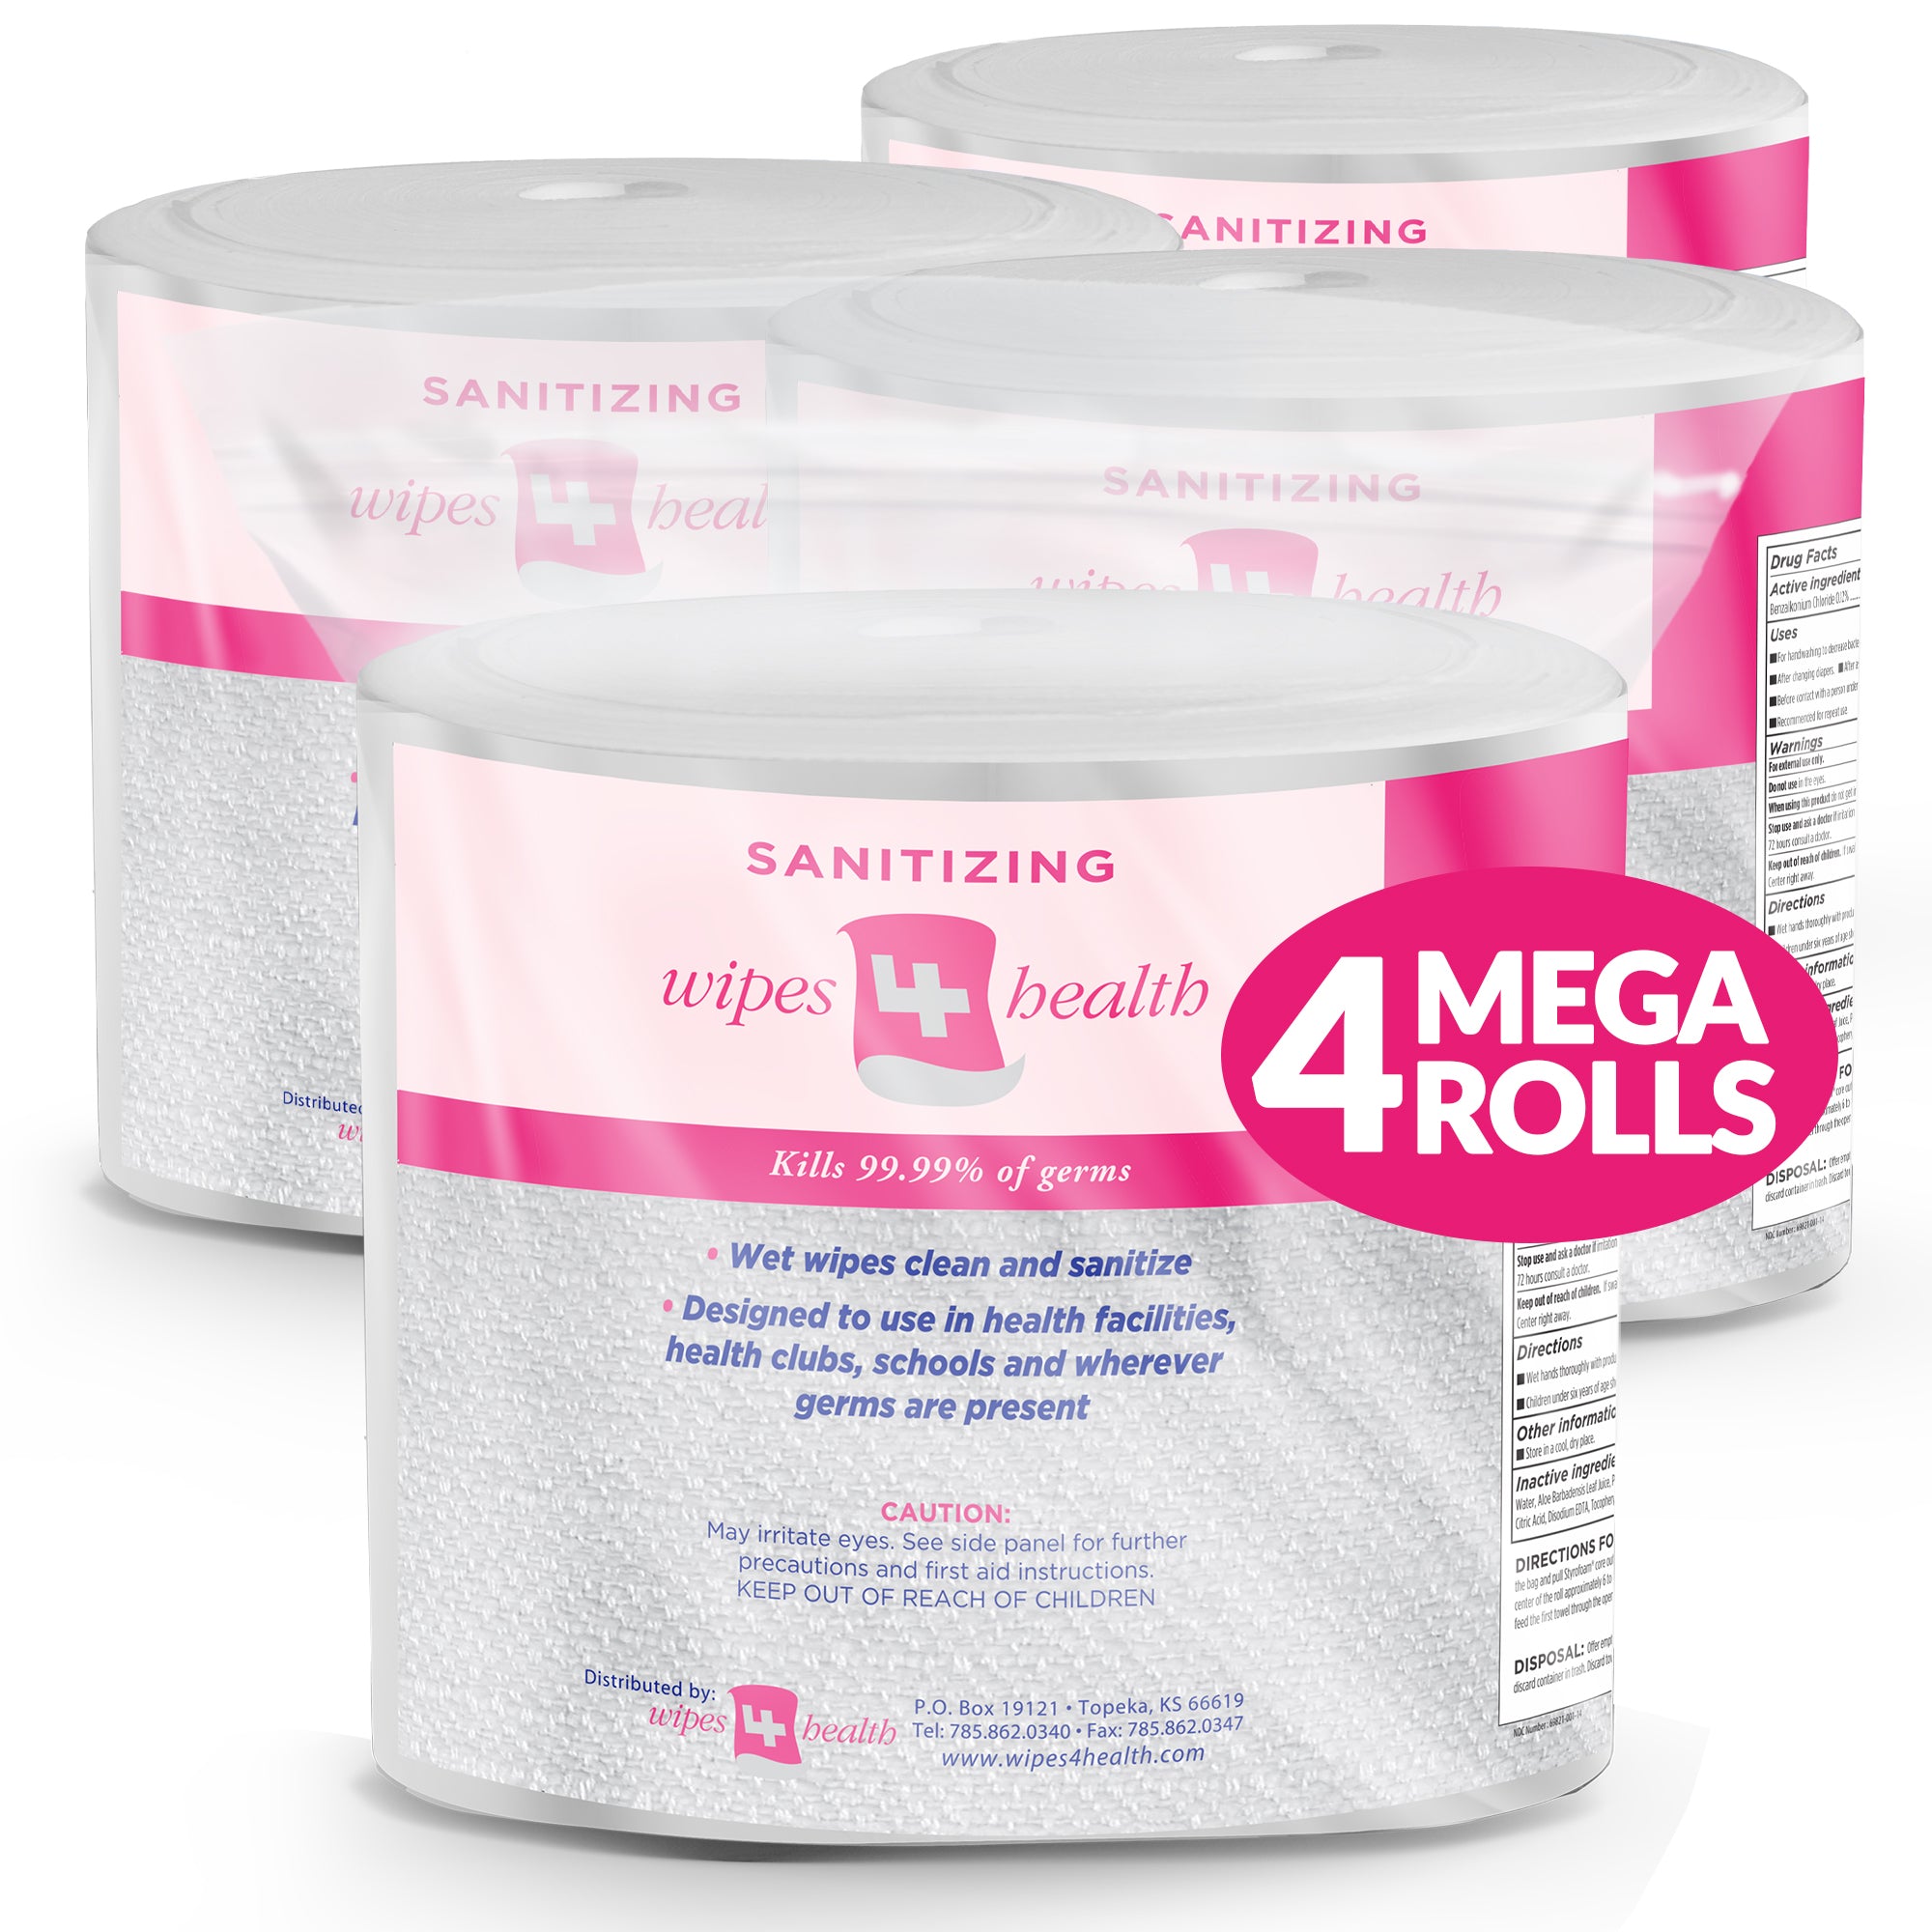 Wipes 4 Health Sanitizing Wipes: 4000 Unscented Wipes (8" x 6"): 4 Refill Mega Rolls